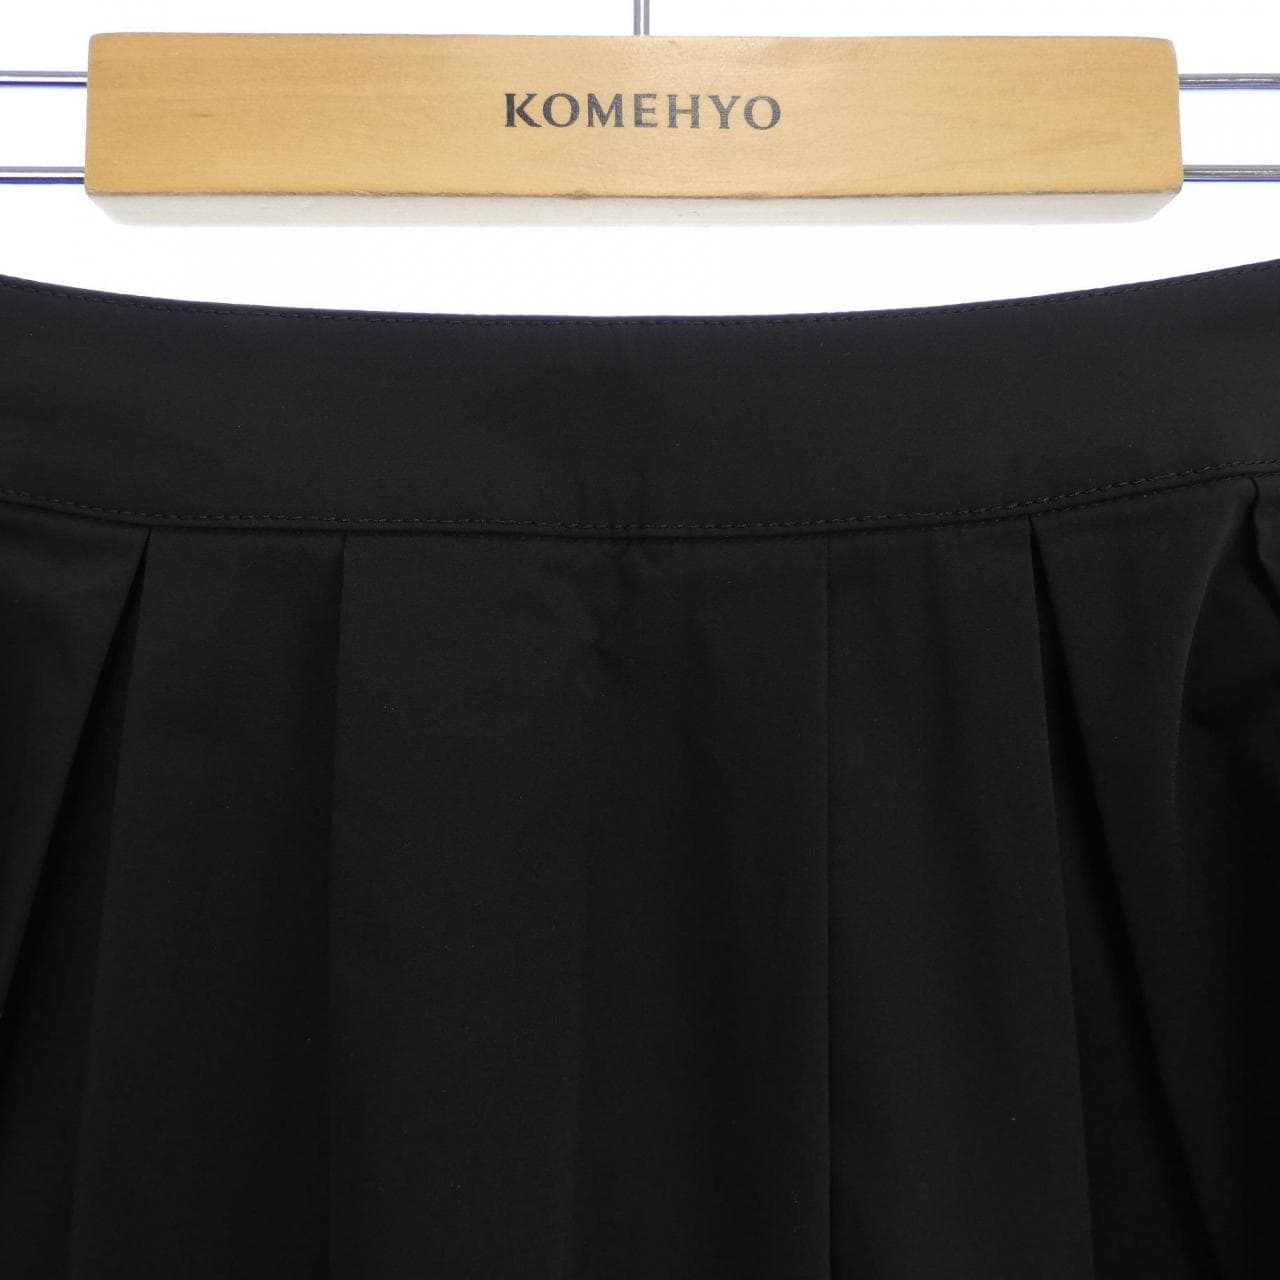 TO BE CHIC Skirt